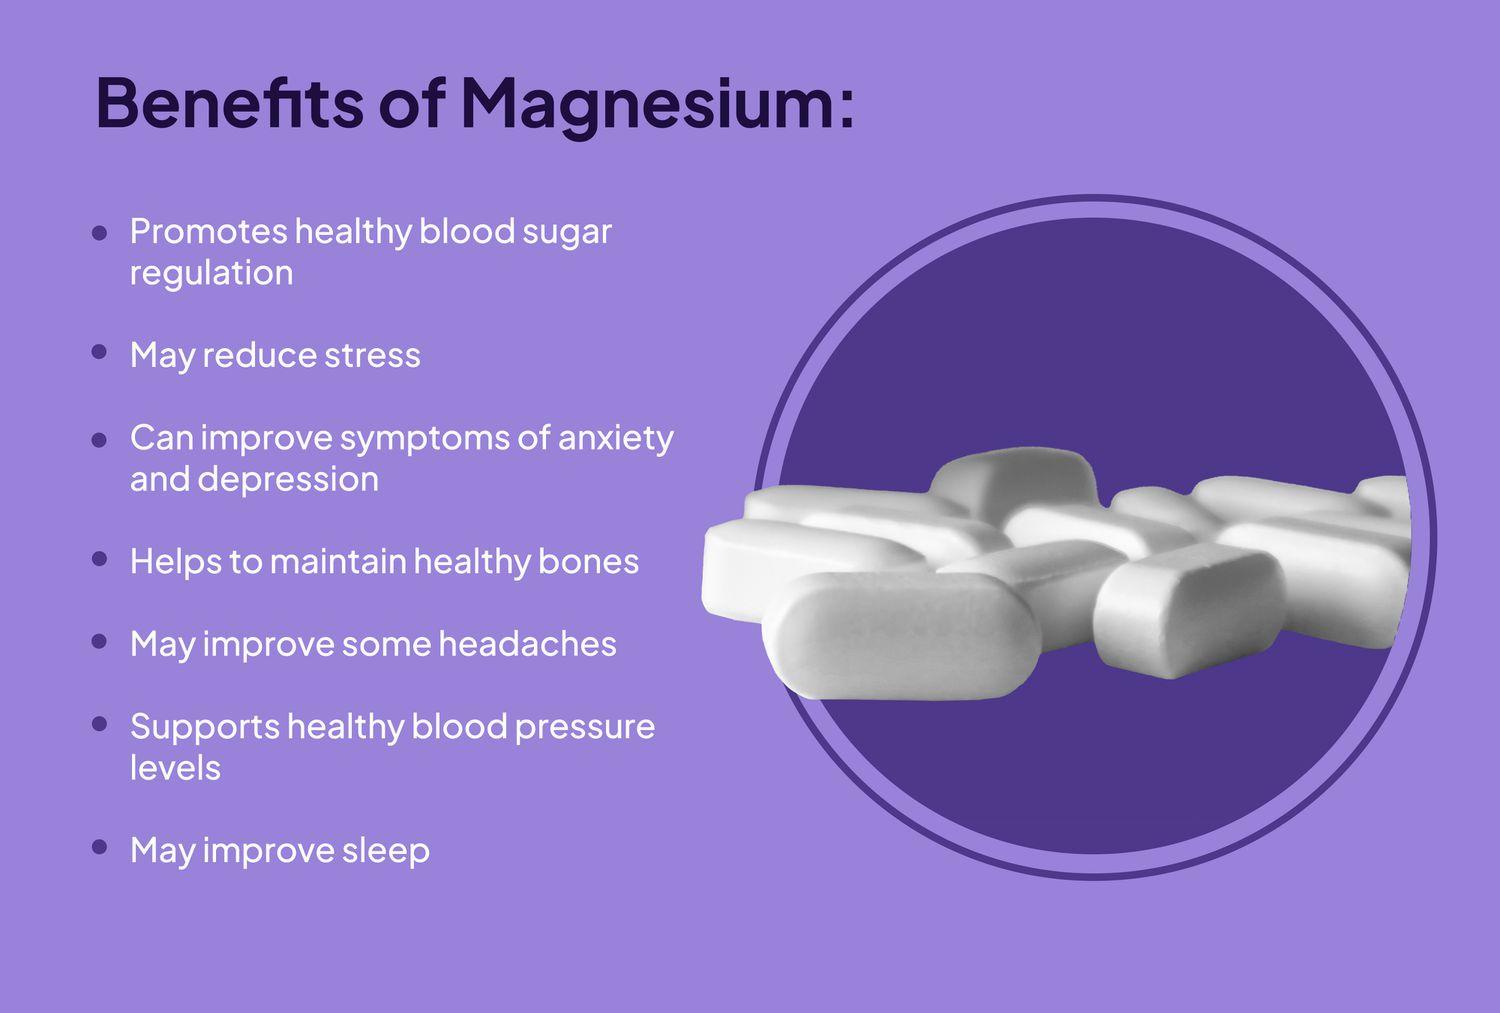 A purple background displays white text listing the benefits of magnesium.